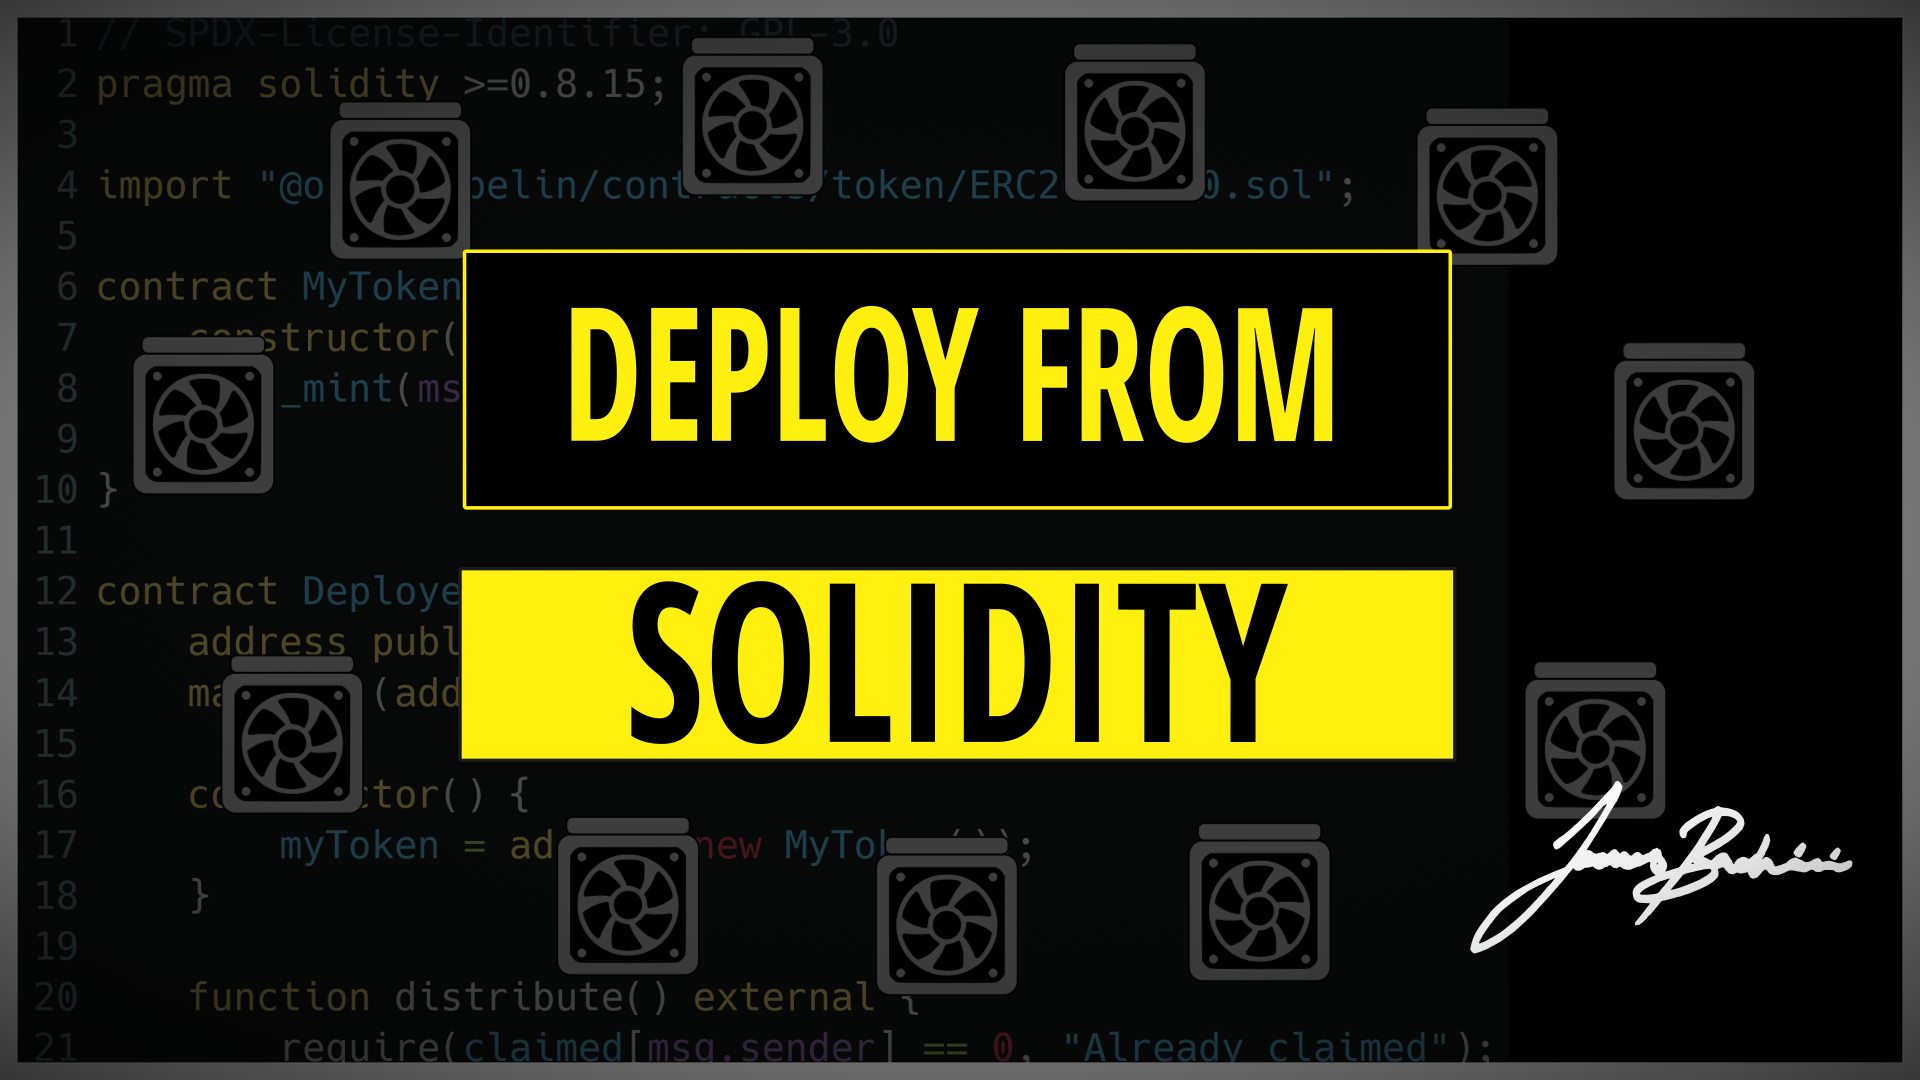 Deploy New Contract From Solidity